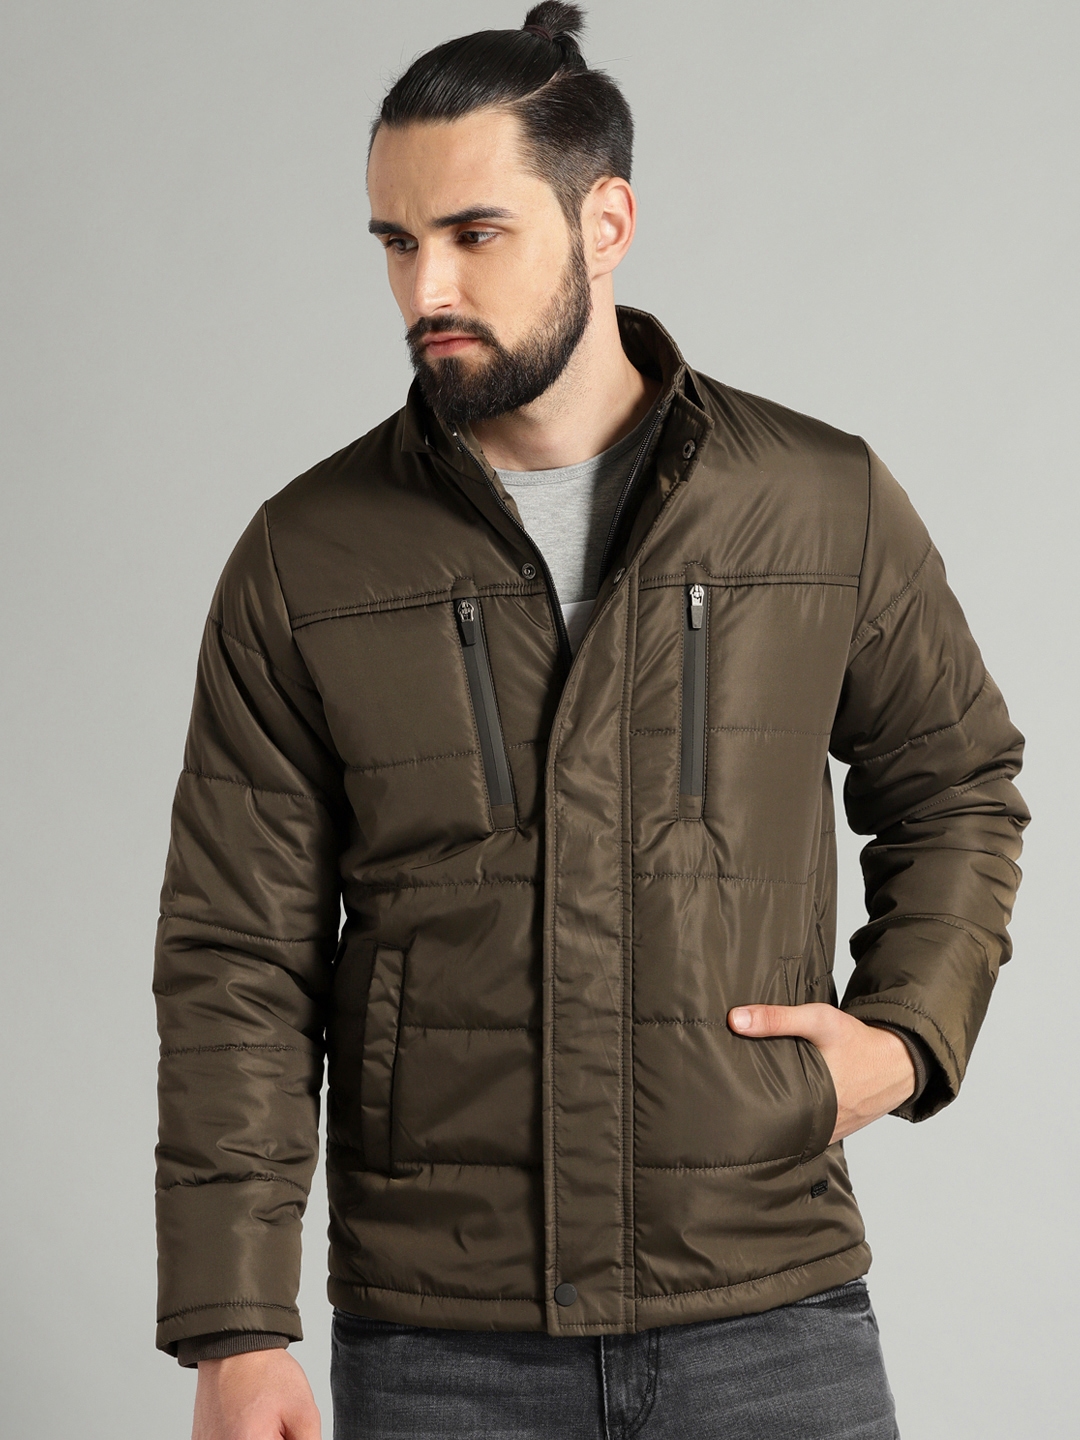 Buy The Roadster Lifestyle Co Men Olive Green Solid Jacket With ...